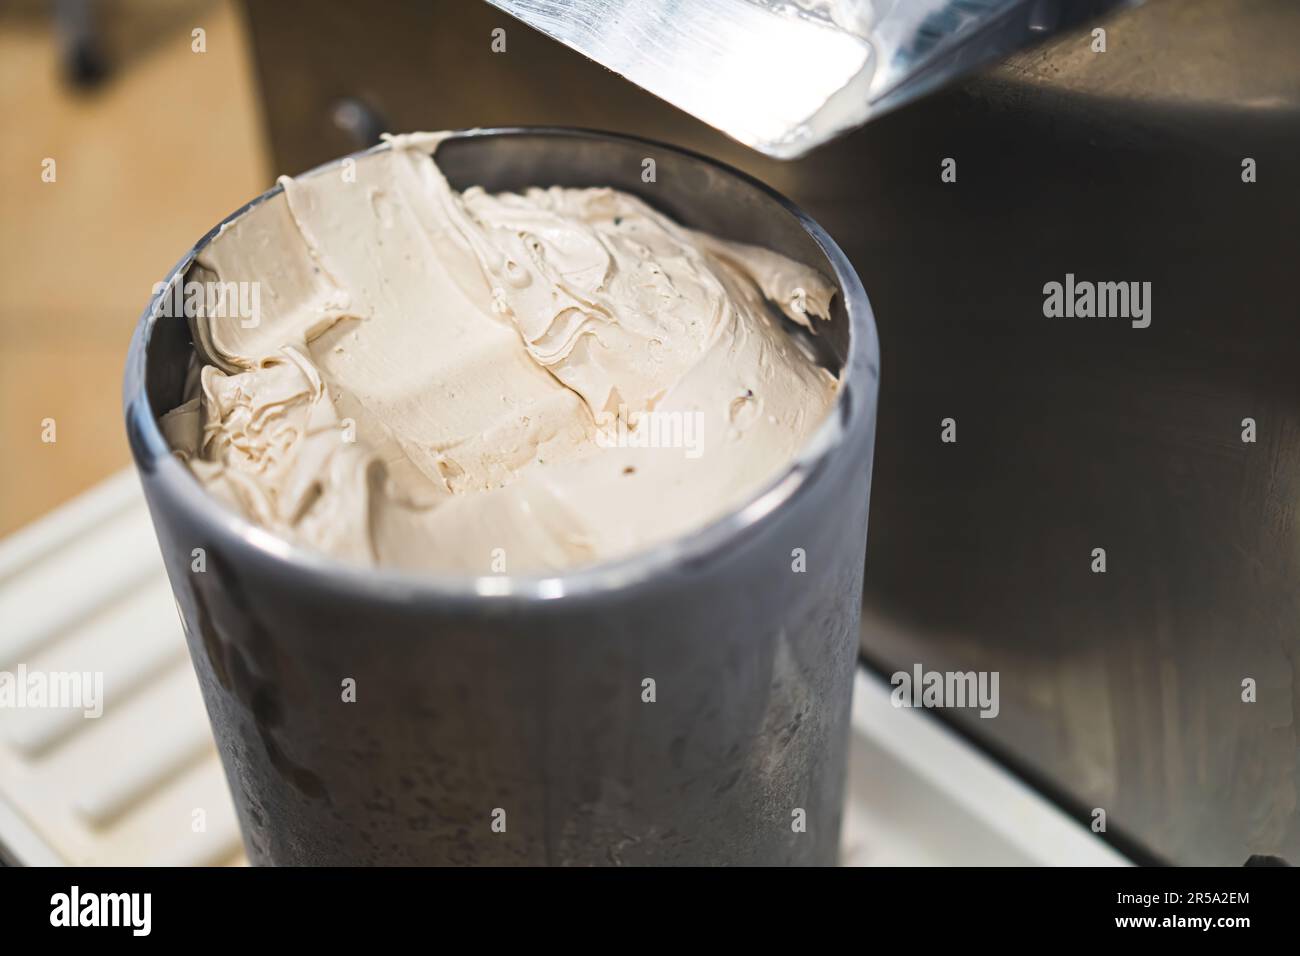 https://c8.alamy.com/comp/2R5A2EM/freshly-prepared-vanilla-ice-cream-in-steel-container-right-from-freezer-closeup-high-quality-photo-2R5A2EM.jpg